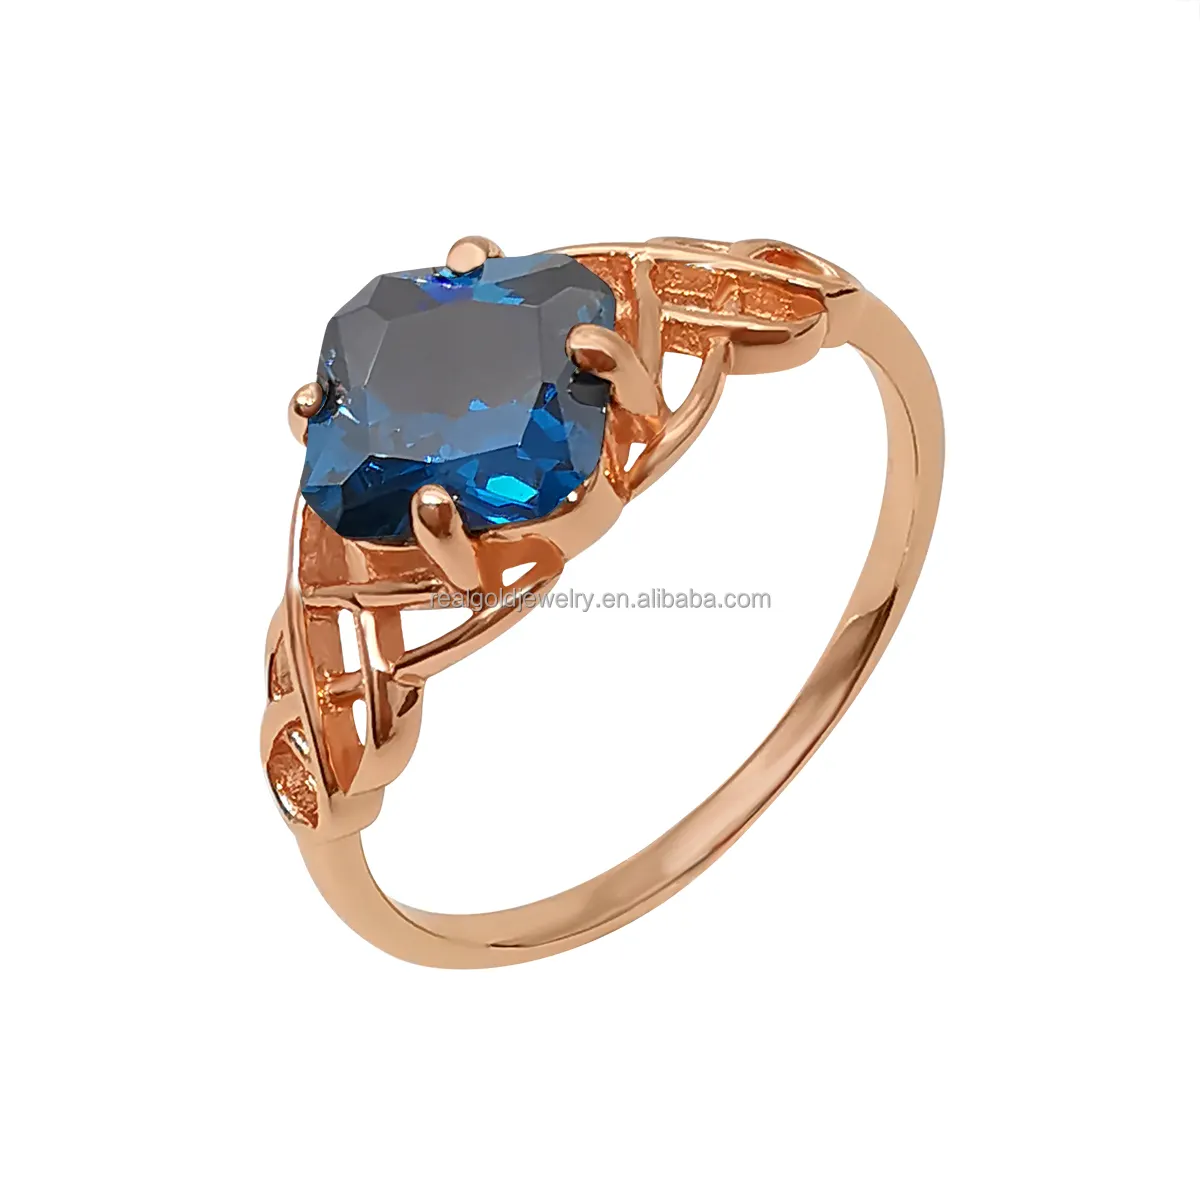 Hot Selling Zircon Stone Rings 14K Real Rose Gold Rings Jewelry Fashion Women Jewelry Ring